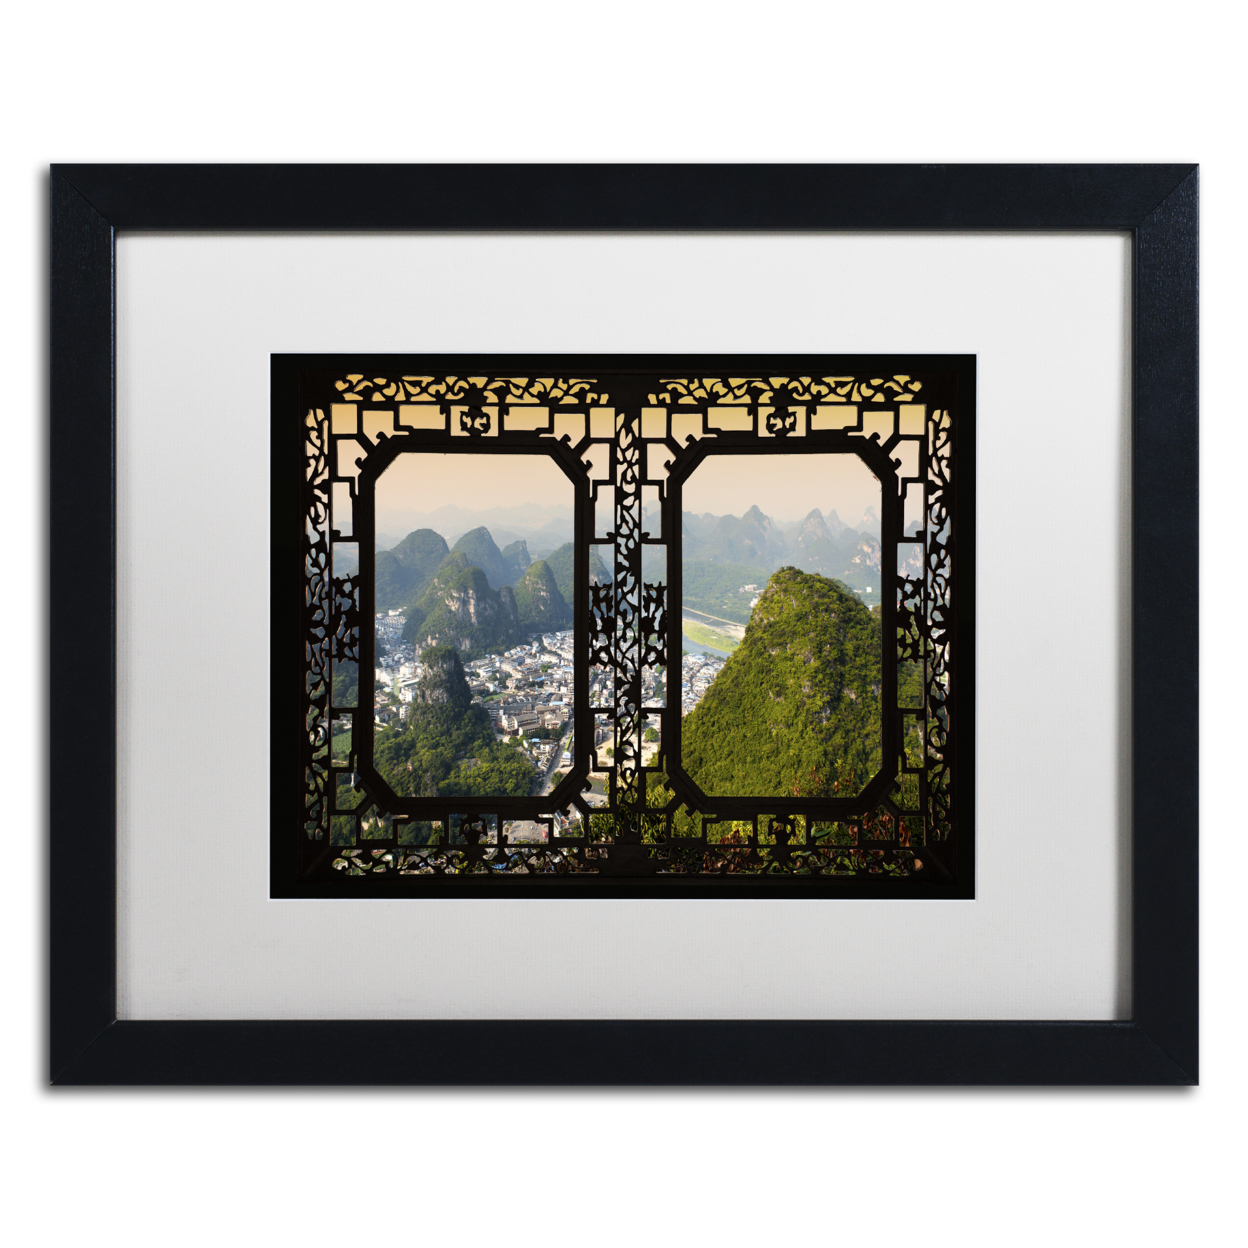 Philippe Hugonnard 'Yangshuo View' Black Wooden Framed Art 18 X 22 Inches